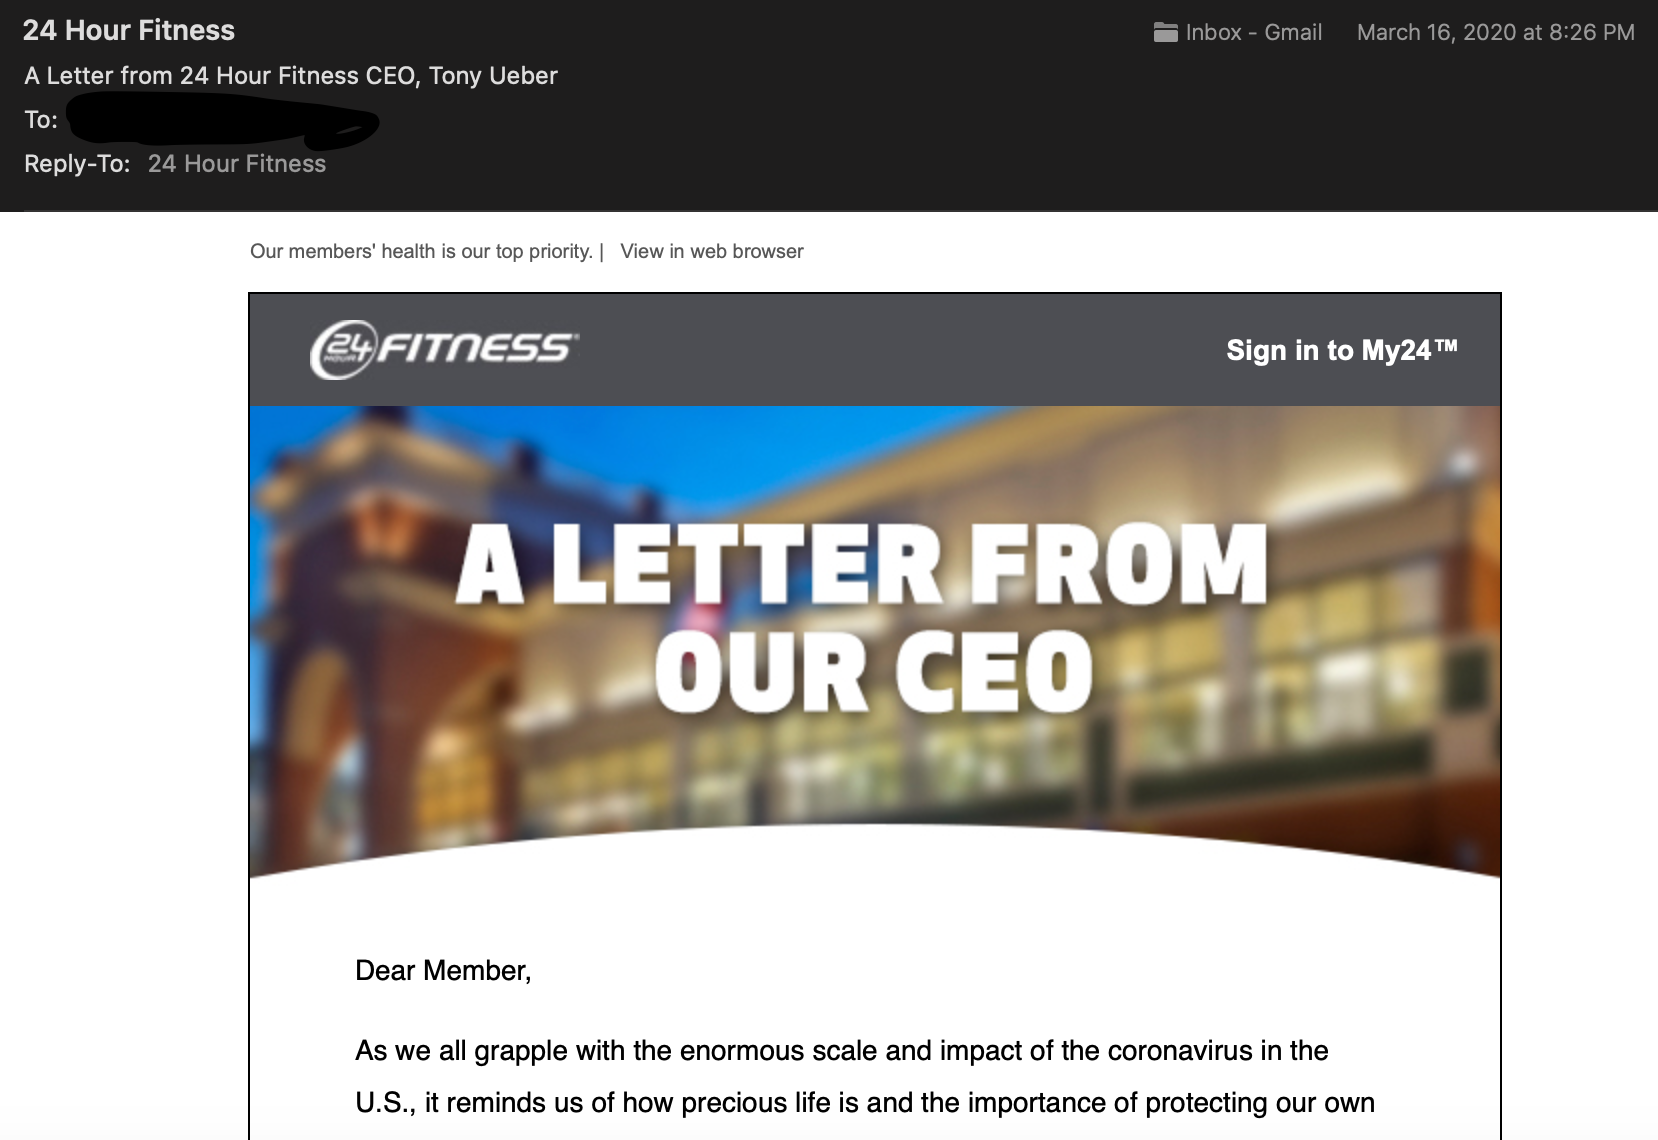 Simple 24 Hour Fitness Lifetime Membership Cancelled for Weight Loss